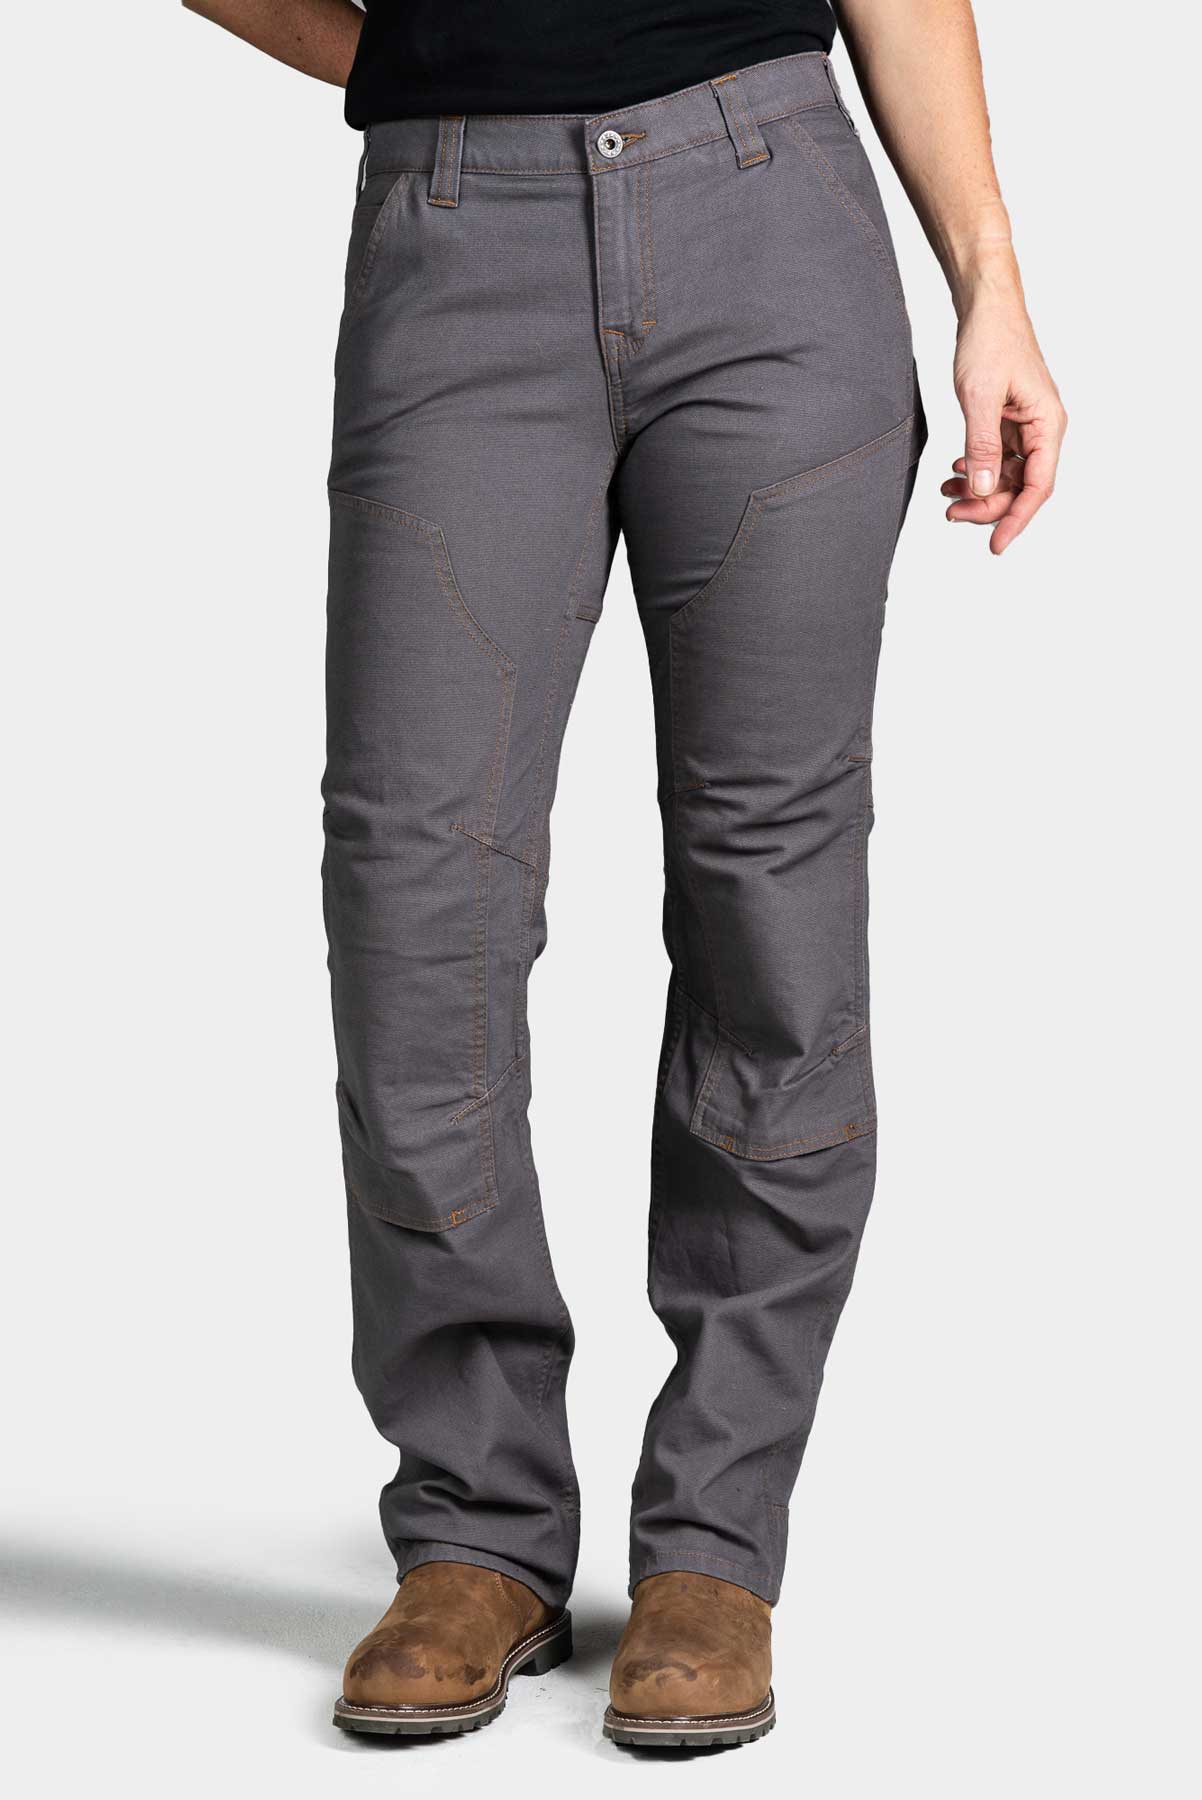 Carhartt Jeans & Pants with Utility Pockets for Women